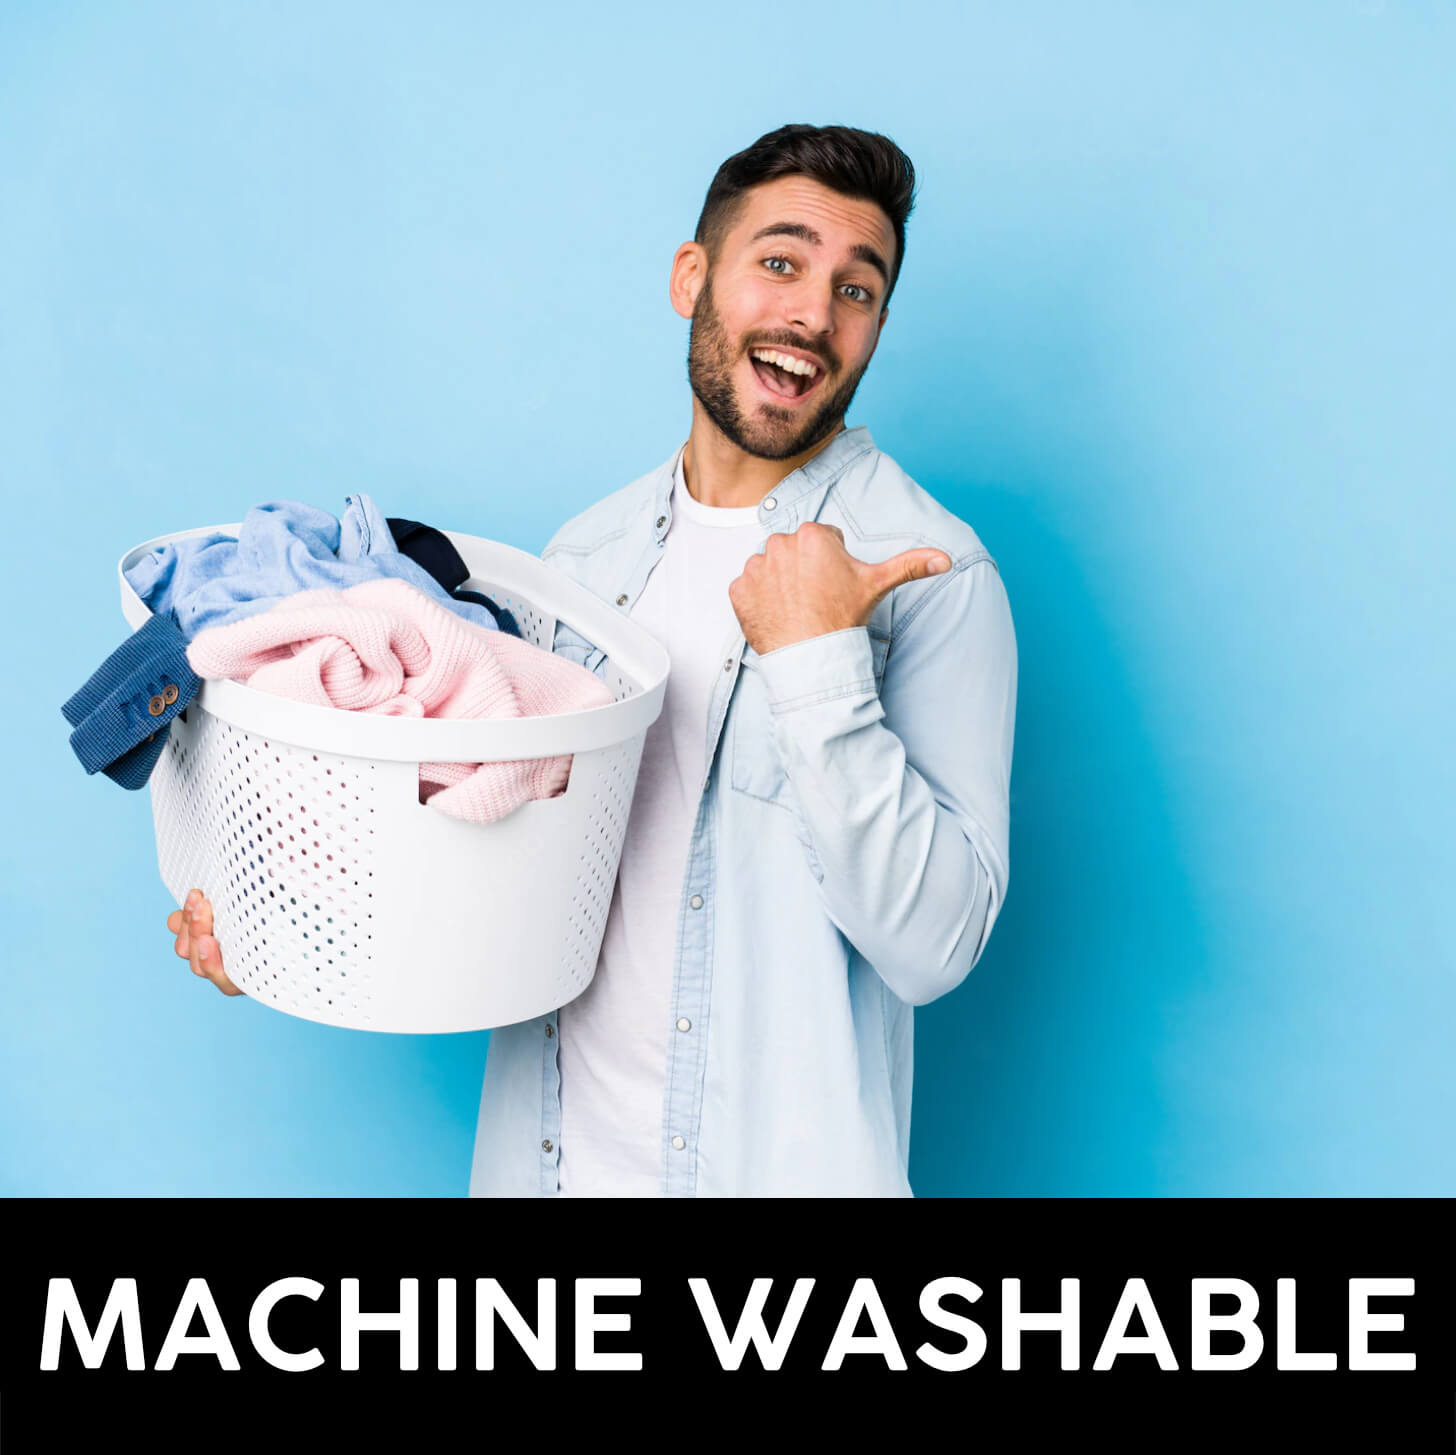 Machine Washable Clothing in Fun Colorful Vibrant Prints. No Fading, No Shrinking, Won't Lose it's Shape, Forever Soft and Bright! Shop alexmilaychev'S Print Based Clothing for Men and Women!